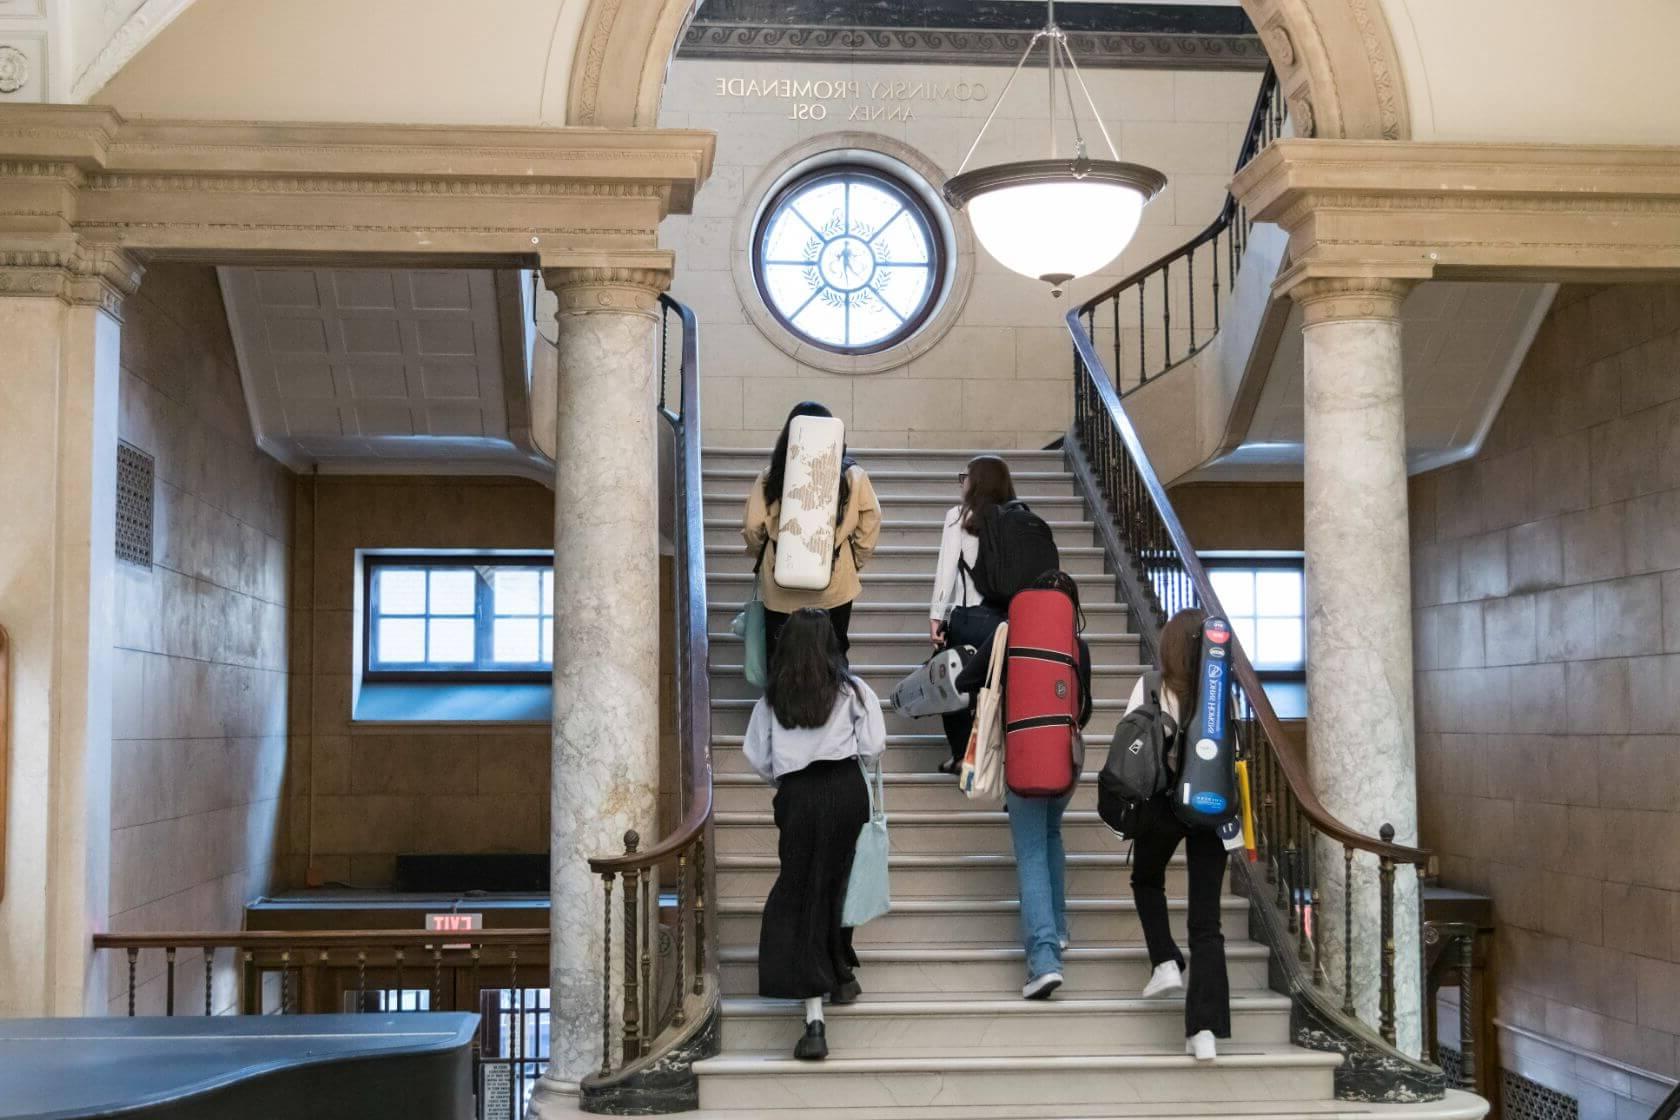 A group of students make their way up a staircase on their way to class at the University of Rochester, Eastman School of Music.